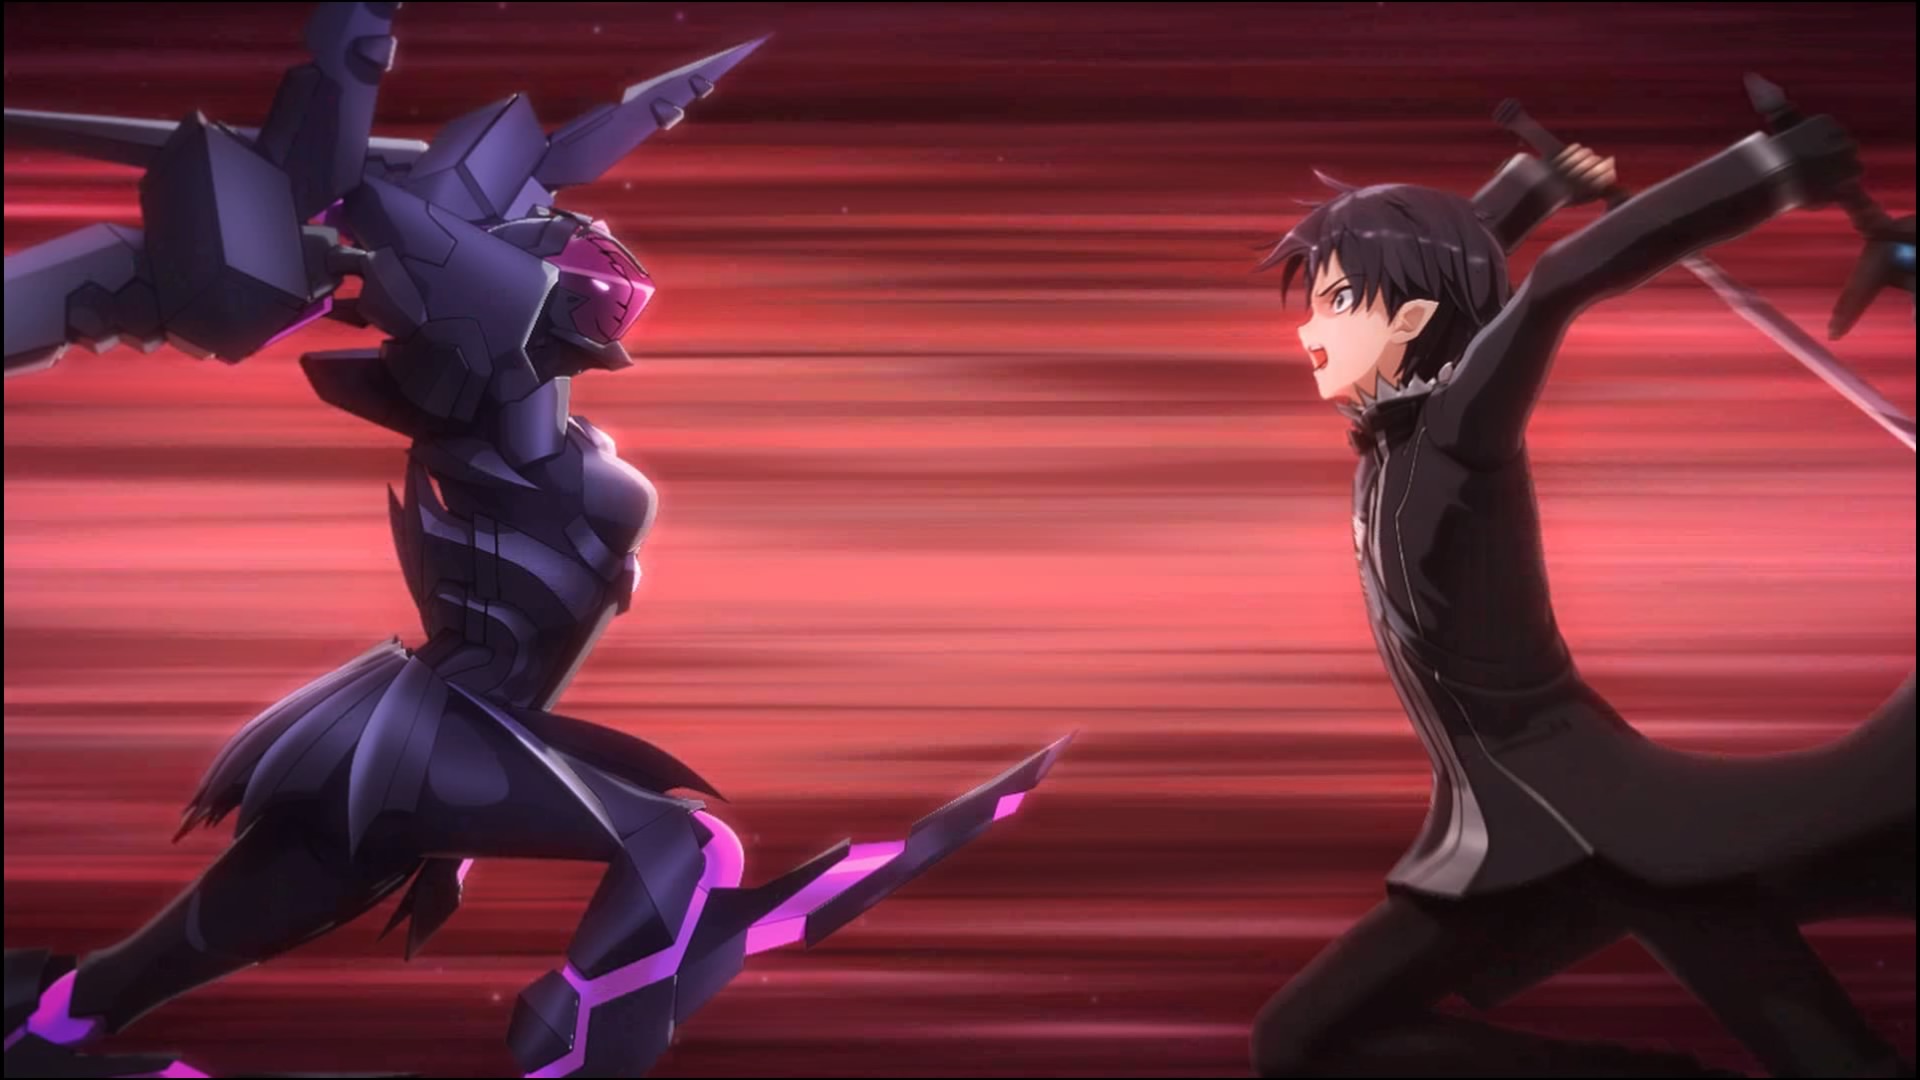 Is Accel World Set in the Same Universe as Sword Art Online?